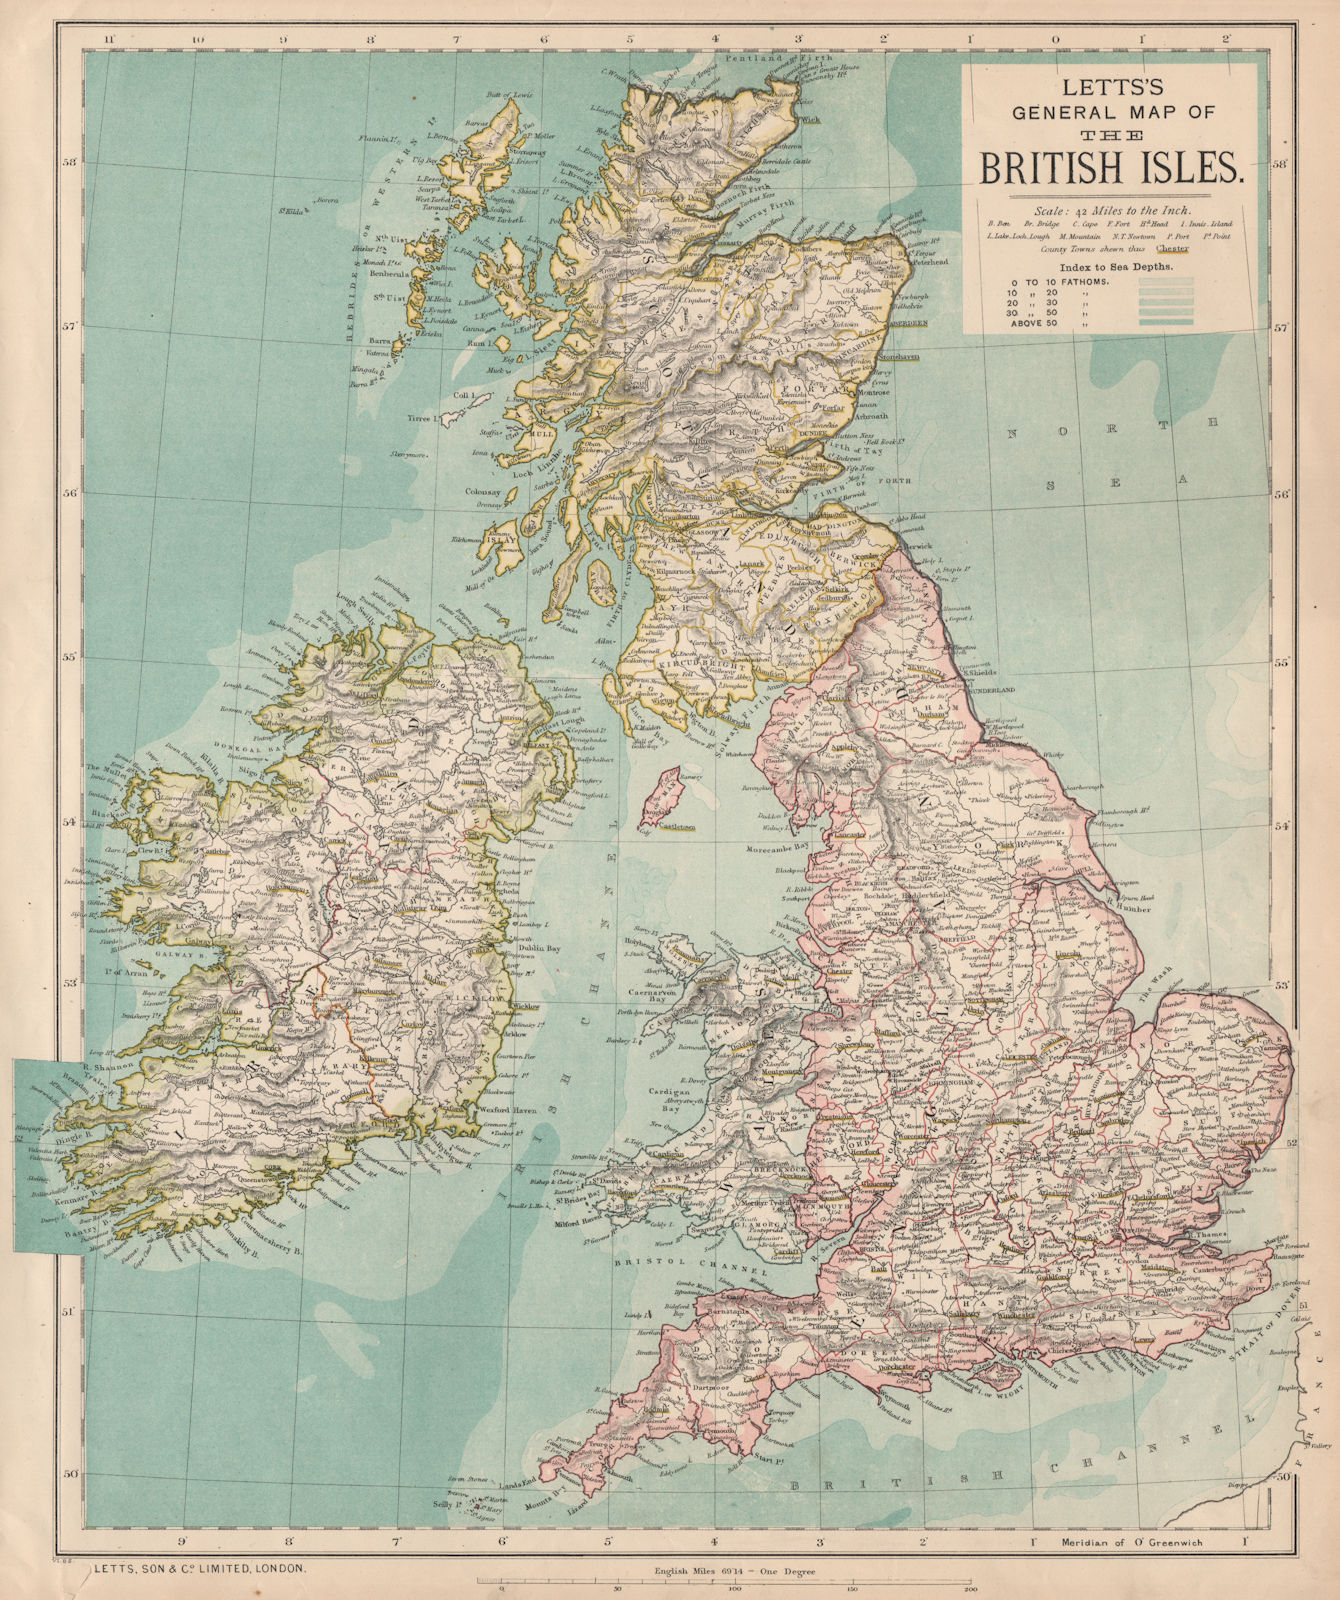 BRITISH ISLES. United Kingdom. Ireland. Counties towns rivers. LETTS 1889 map